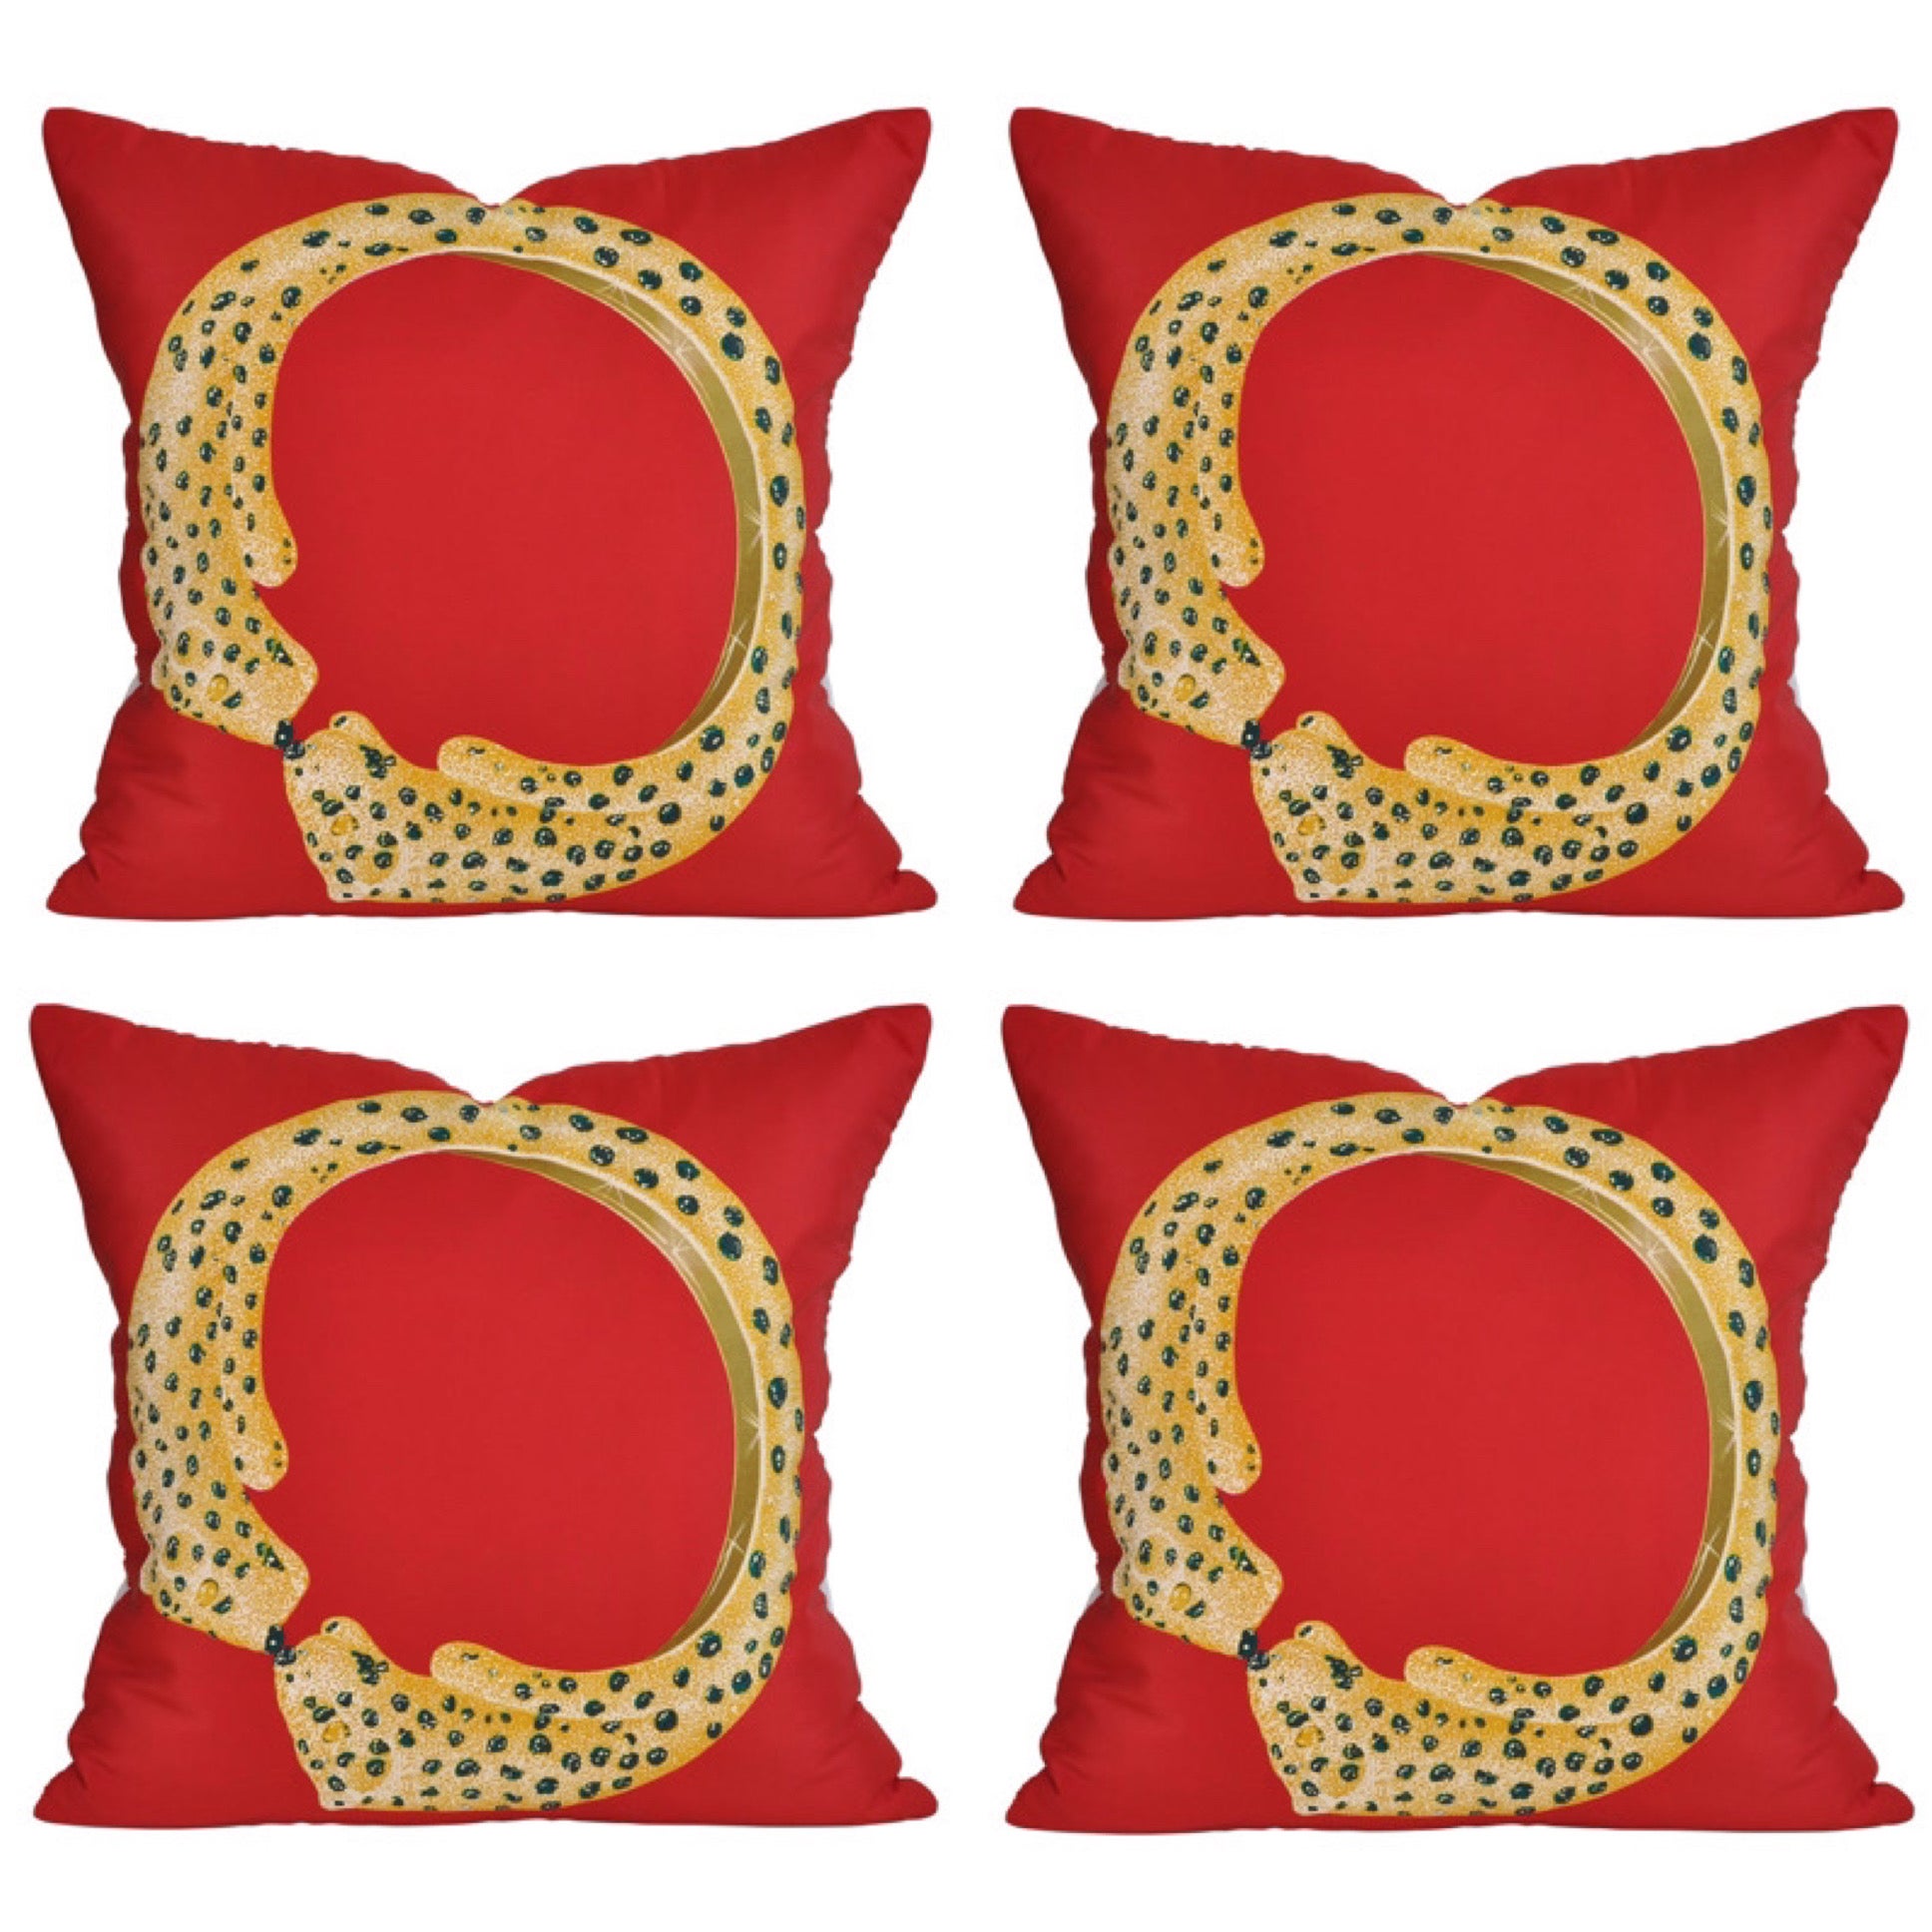 Set of Rare Vintage Cartier Panther Bracelet Silk Scarf Pillows in Red Gold